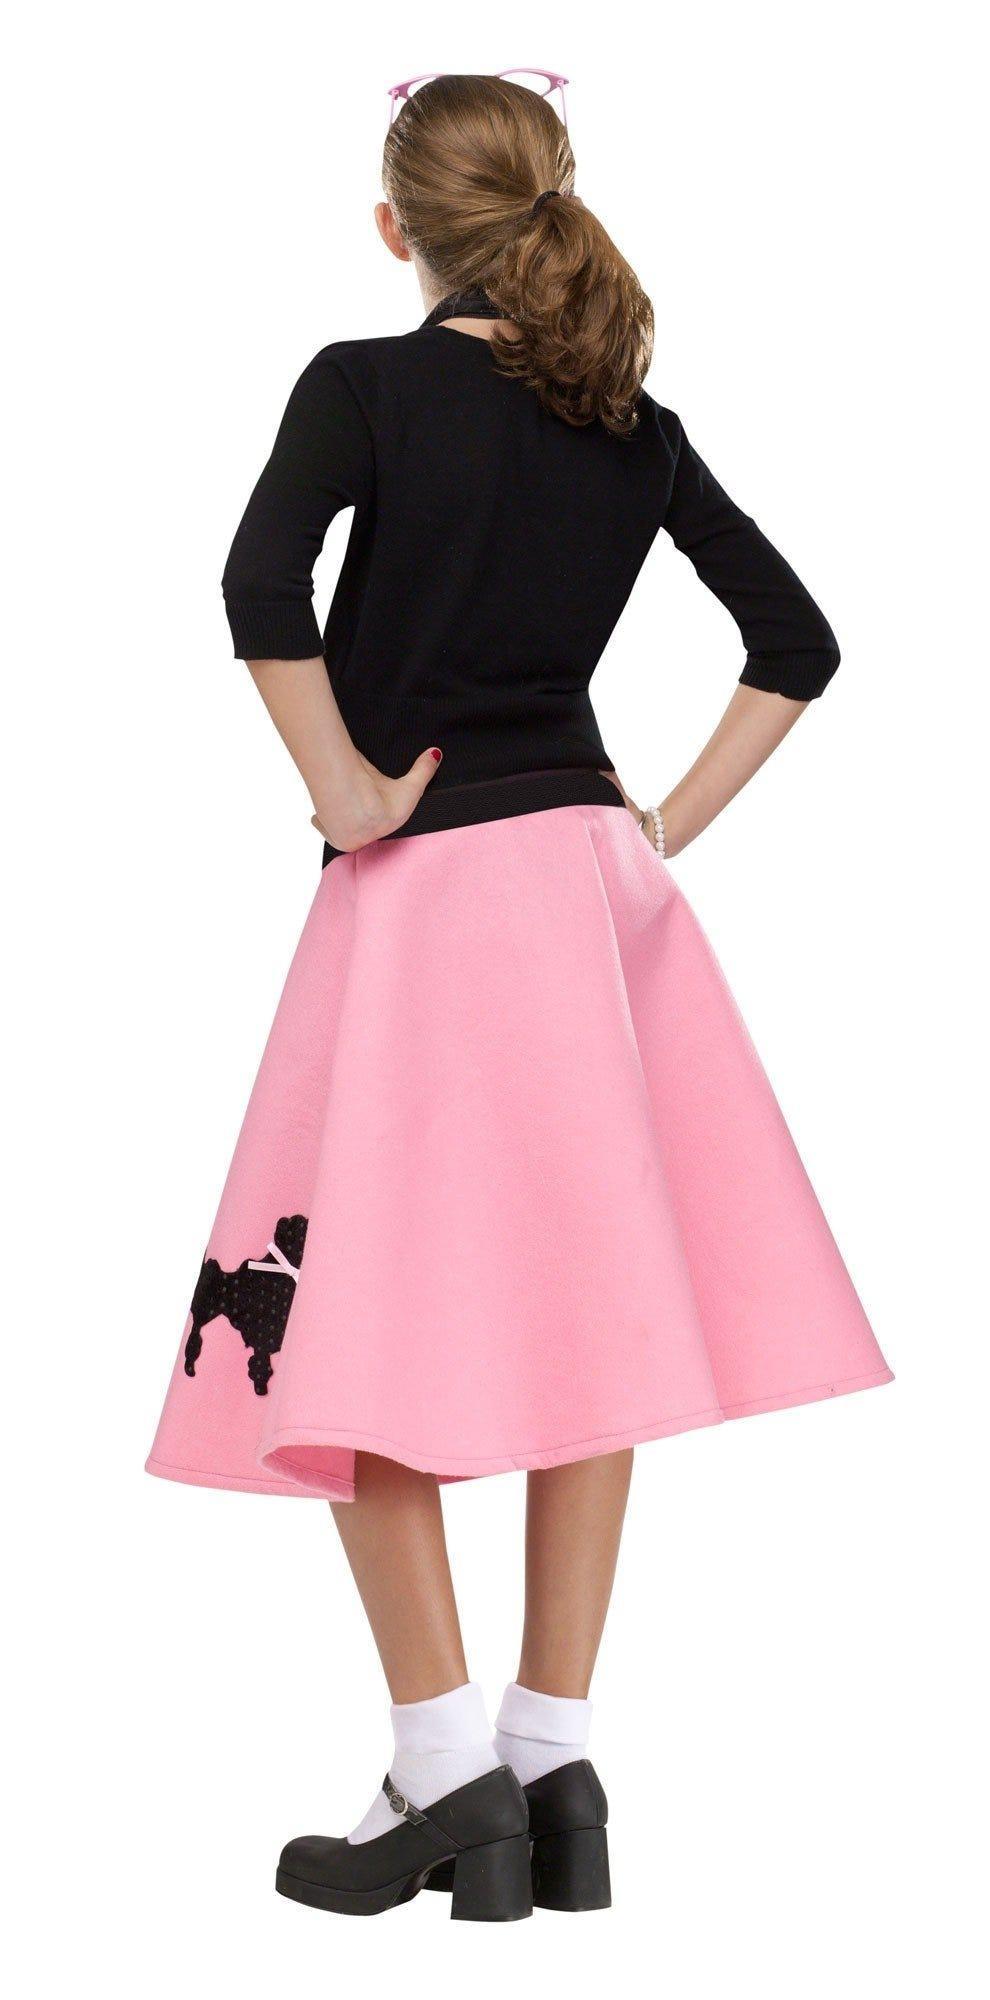 Poodle Skirt 50s Girls Costume